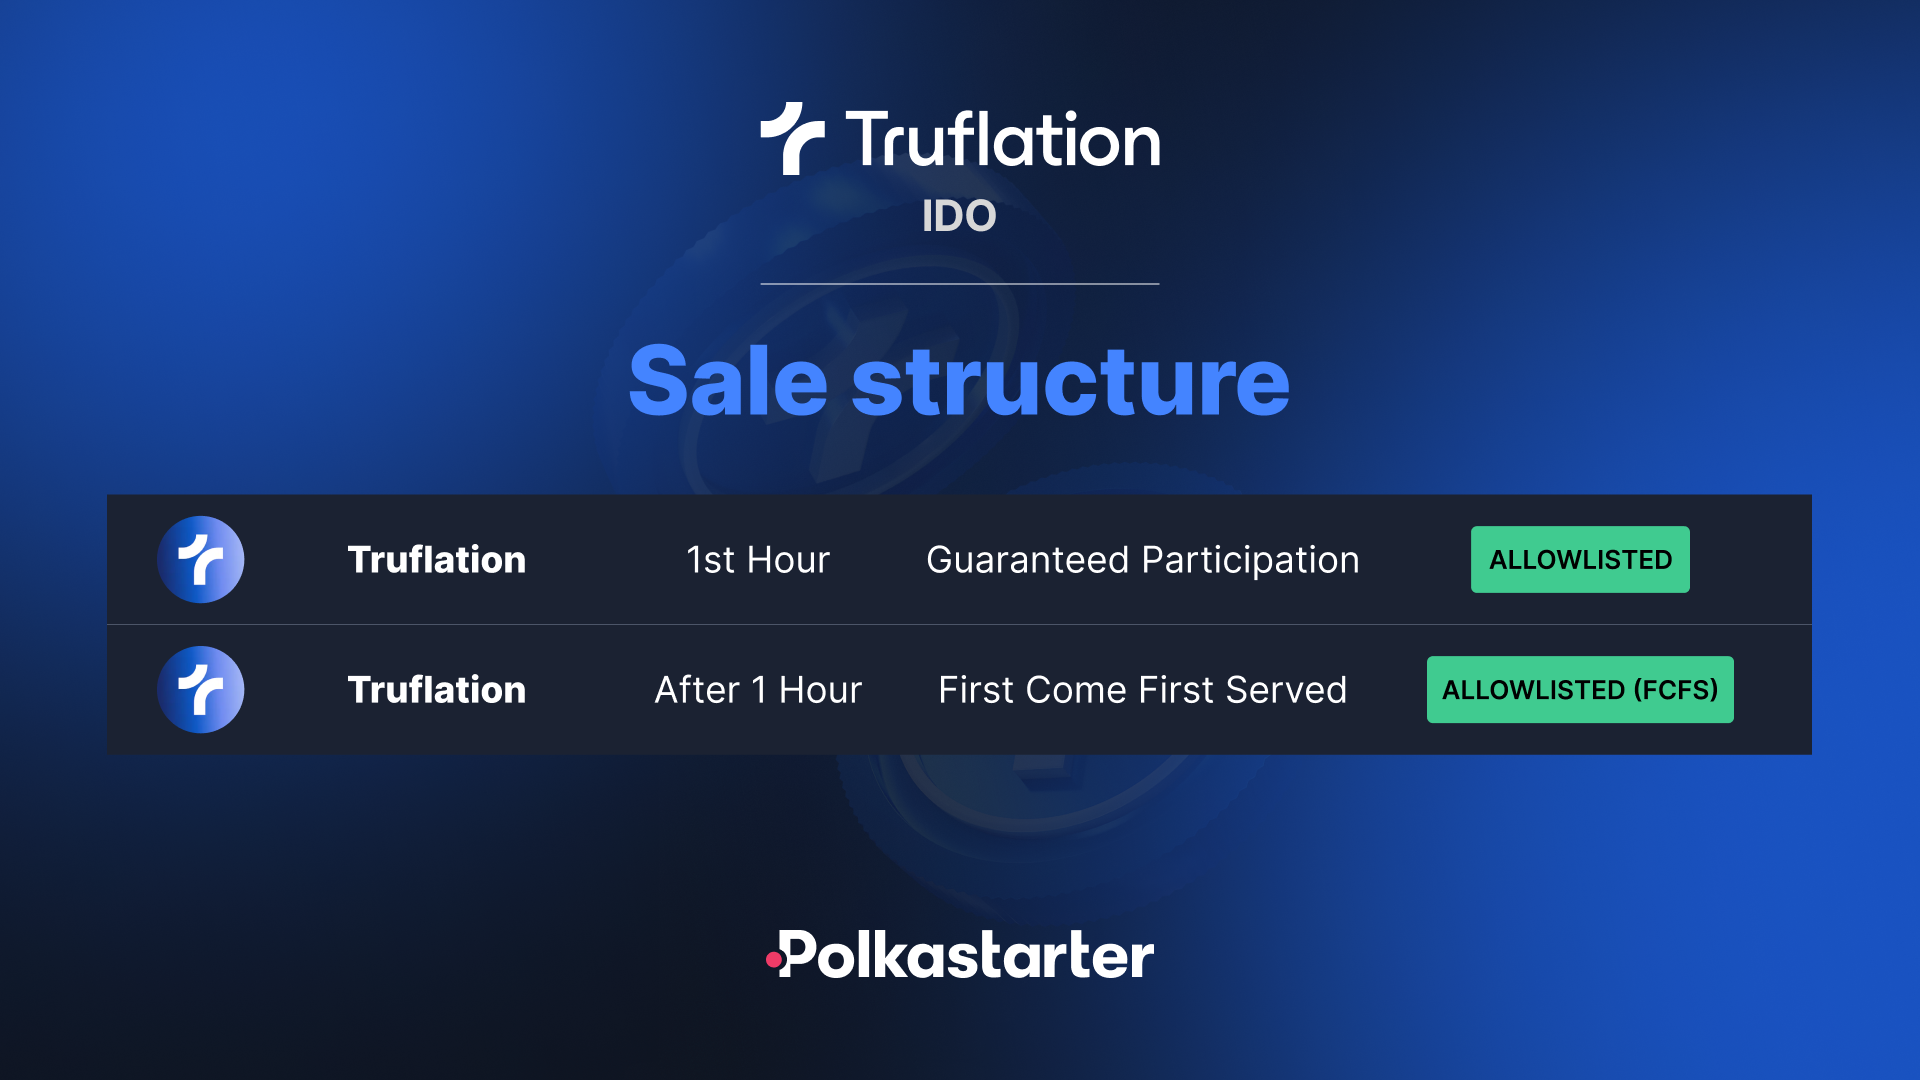 How to Participate in the Truflation Public Sale?